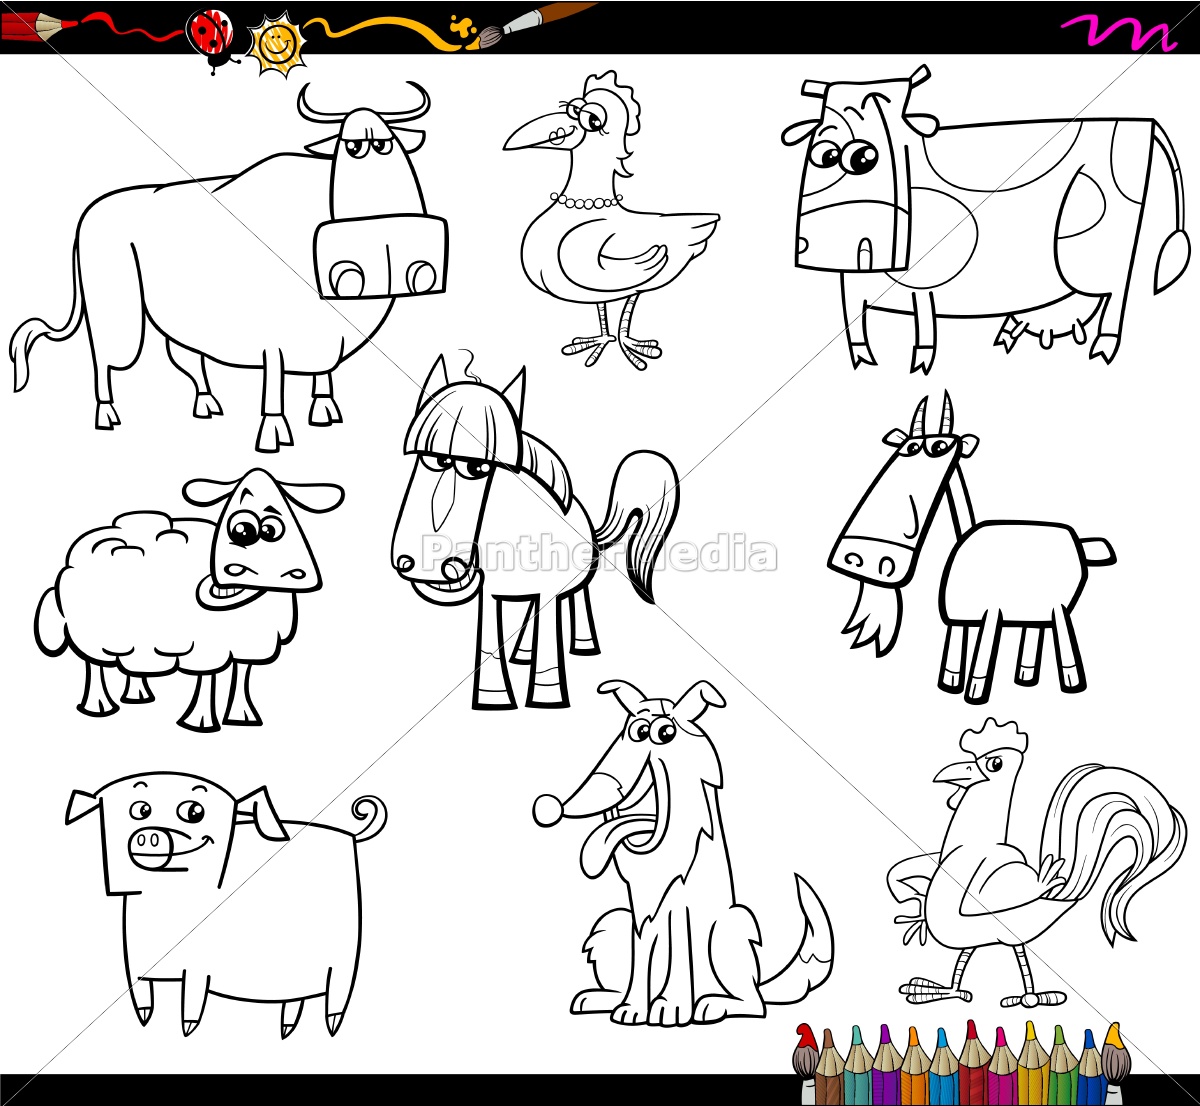 Download Farm Animals Coloring Bookd Set Royalty Free Image 14726889 Panthermedia Stock Agency